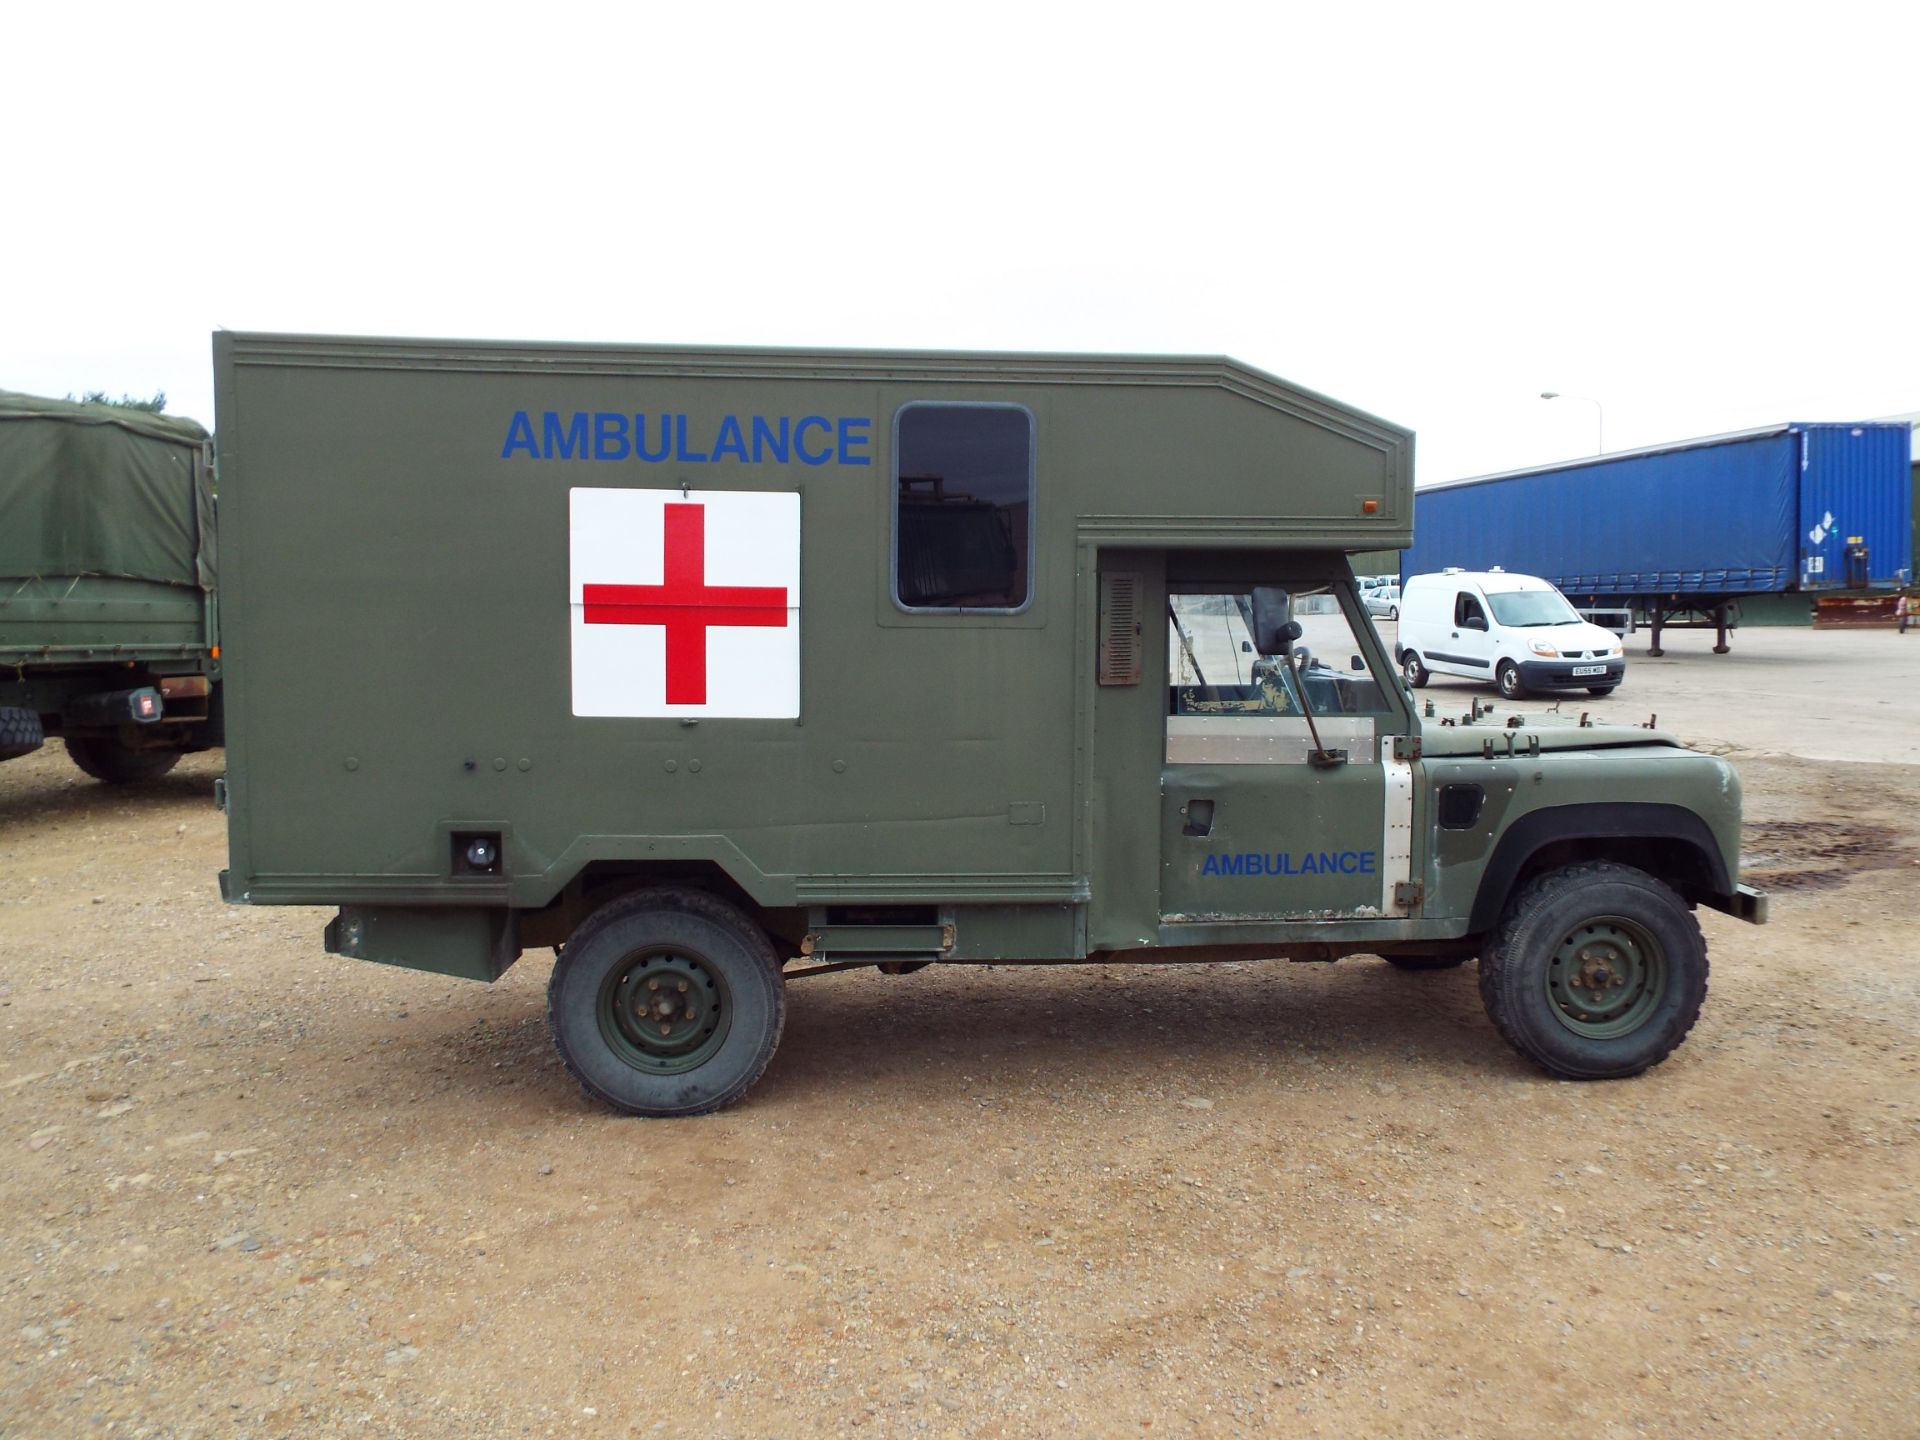 Military Specification Land Rover Wolf 130 ambulance - Image 8 of 28